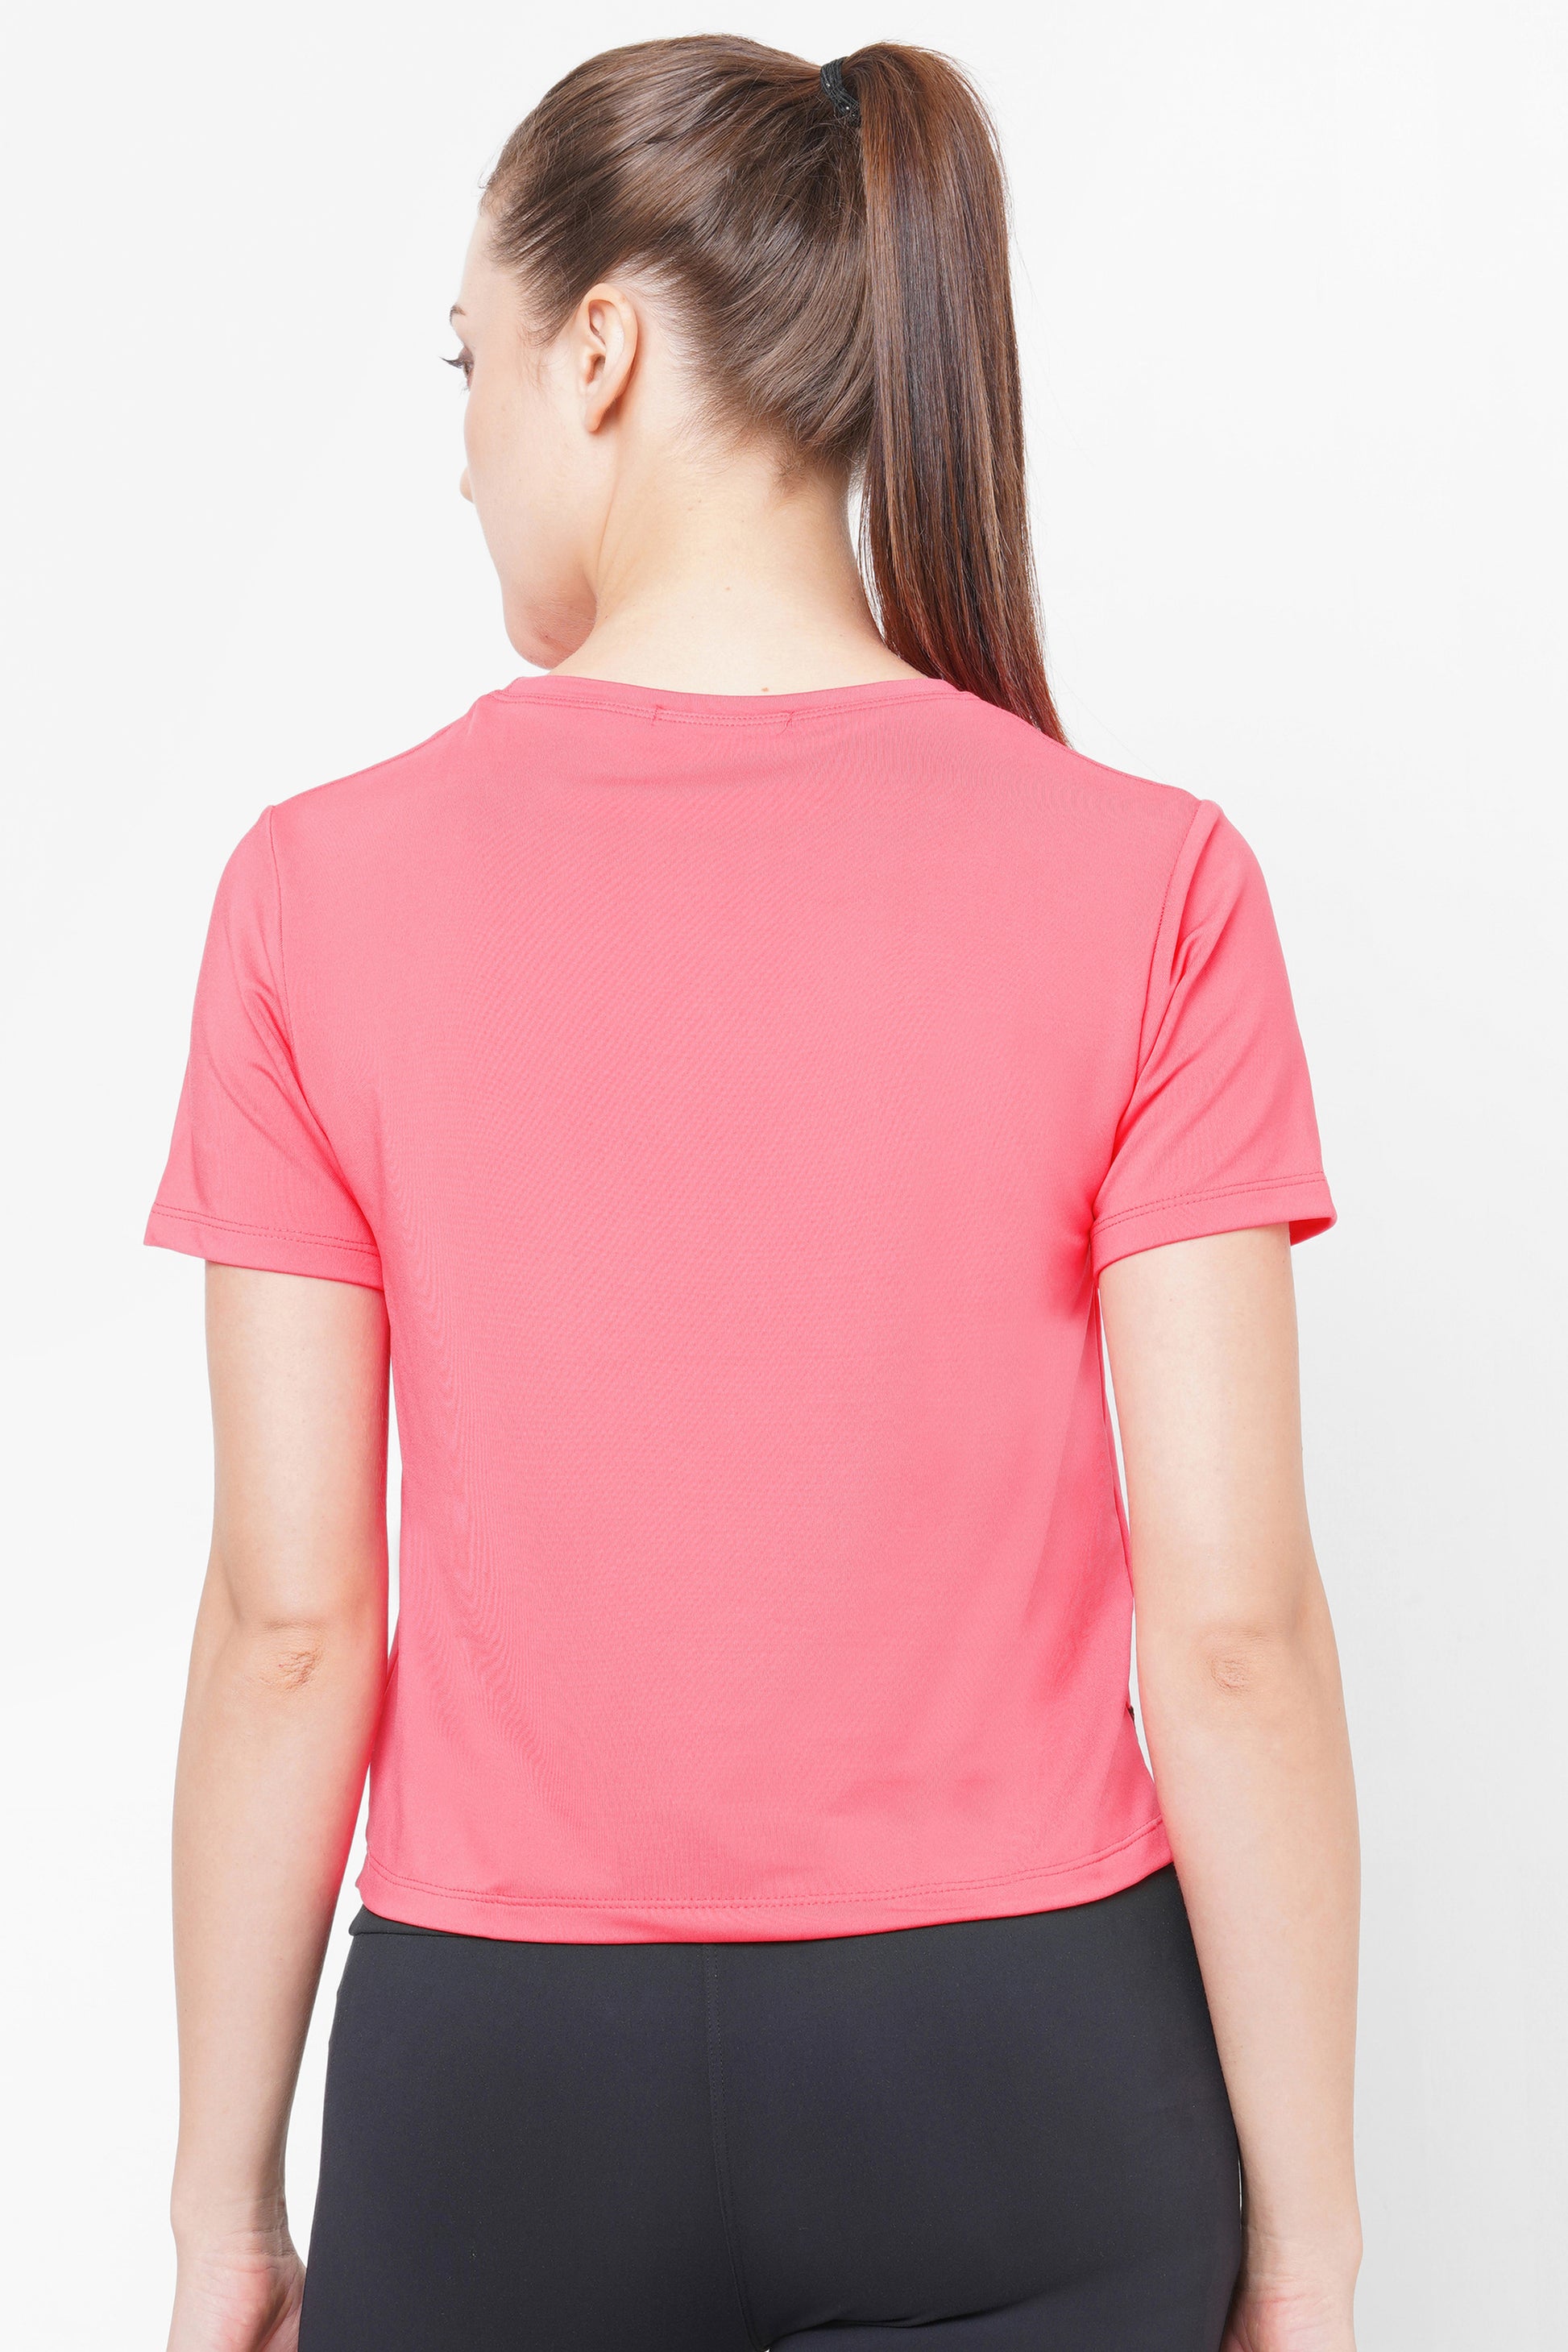 Laasa Sports - LAASA SPORTS Women's Active Wear T Shirt For more details DM  us or visit our website at www.laasasports.com #instagood #photooftheday  #fashion #instafashion #lifestyle #repost #follow #picoftheday #fitness  #outfit #instapick #